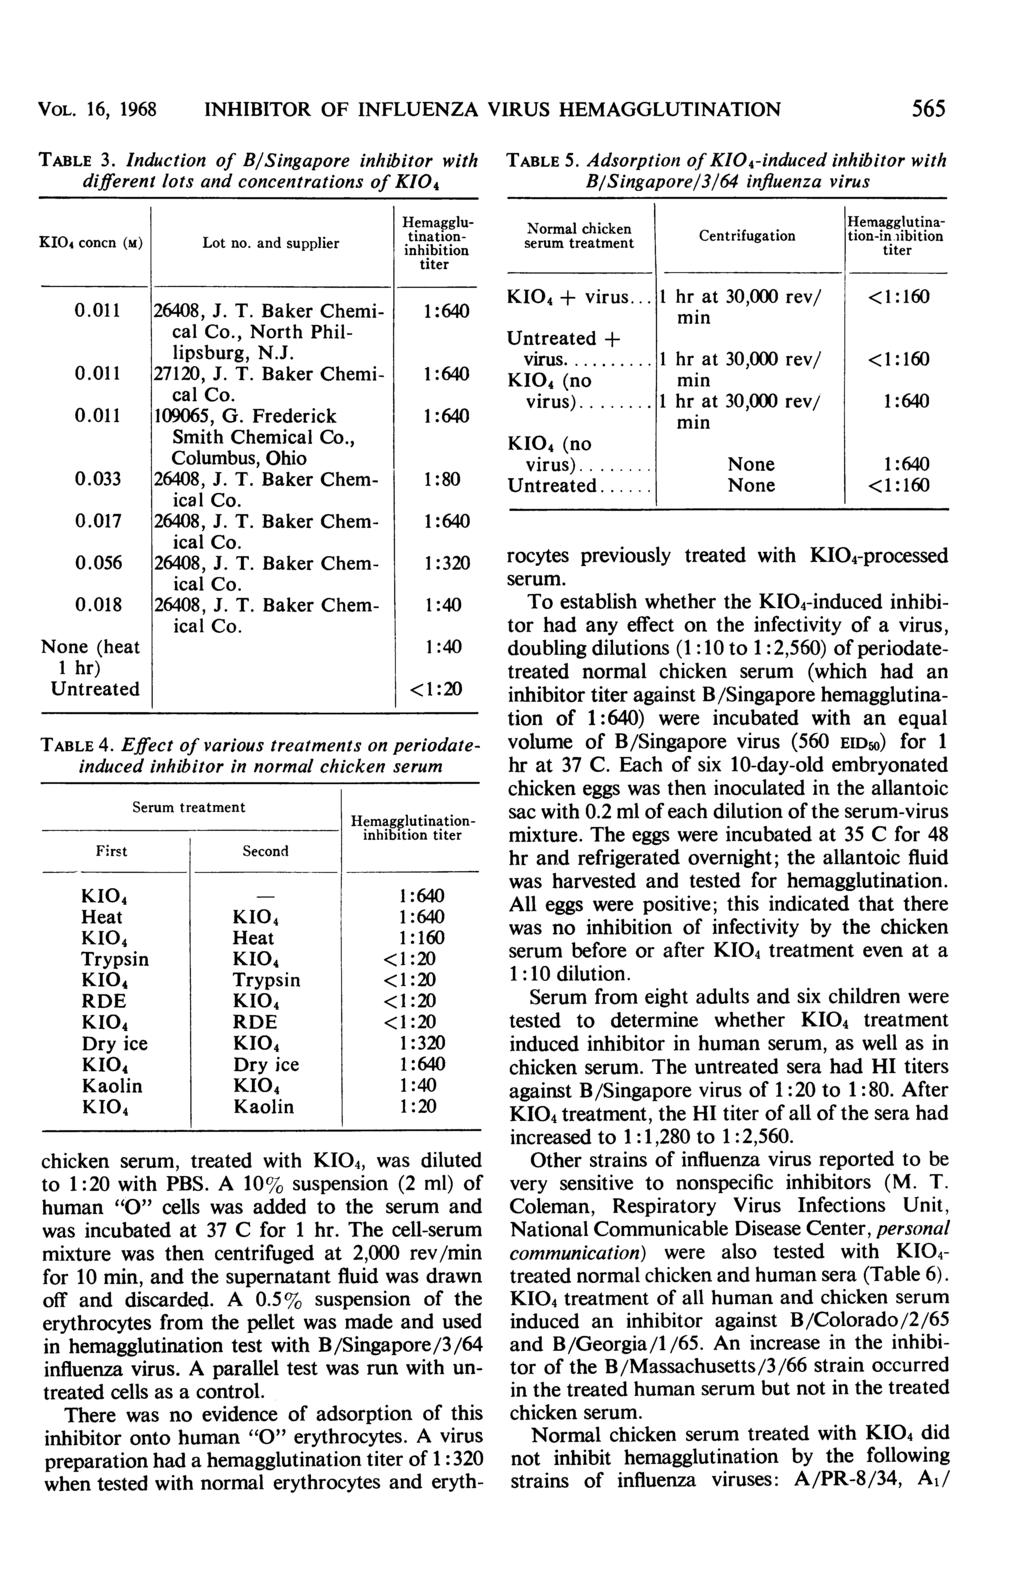 VOL. 16, 1968 INHIBITOR OF INFLUENZA VIRUS HEMAGGLUTINATION 565 TABLE 3. Induction of B/Singapore inhibitor with different lots and concentrations of Hemagglu- K1I4 concn (M) Lot no.